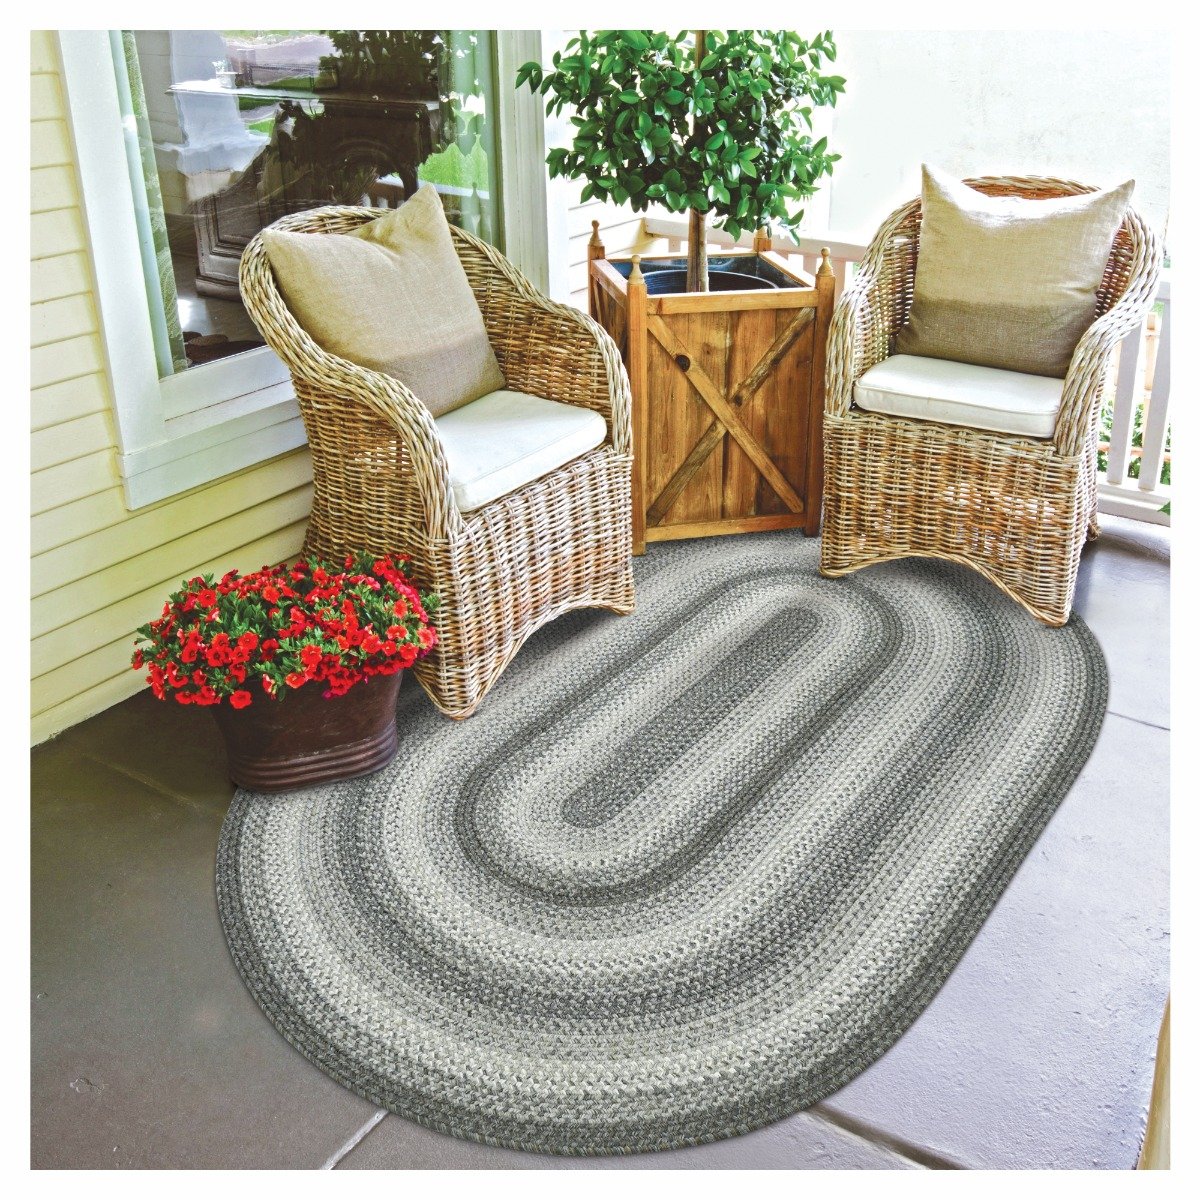 The Best Braided Rug: Mariam Handmade Braided Indoor/Outdoor Area Rug, The  Most Stylish Outdoor Wayfair Rugs